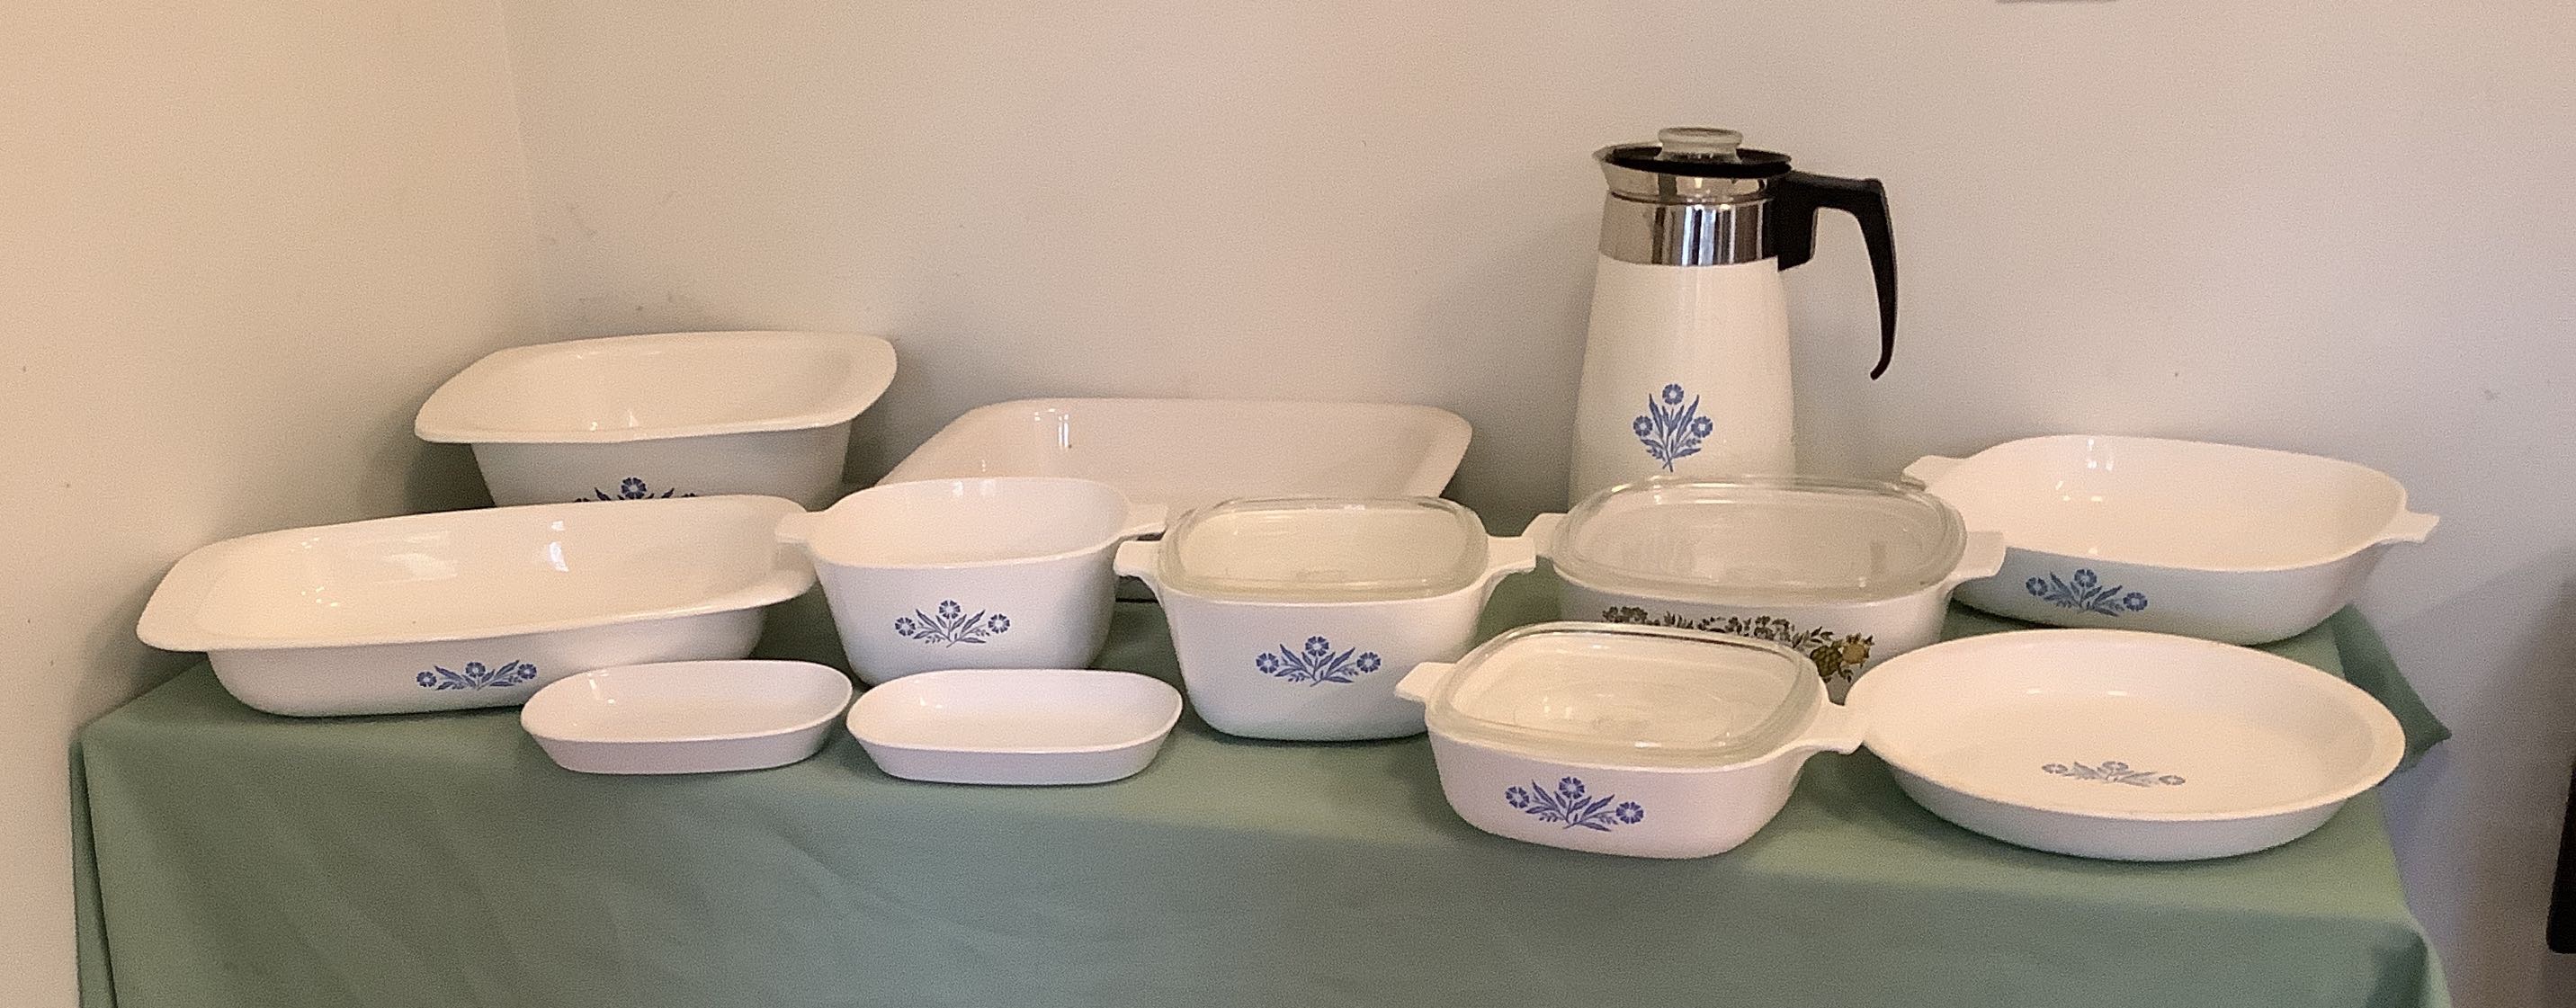 Sold at Auction: VINTAGE CORNING WARE COFFEE POT & PYREX PLATTER